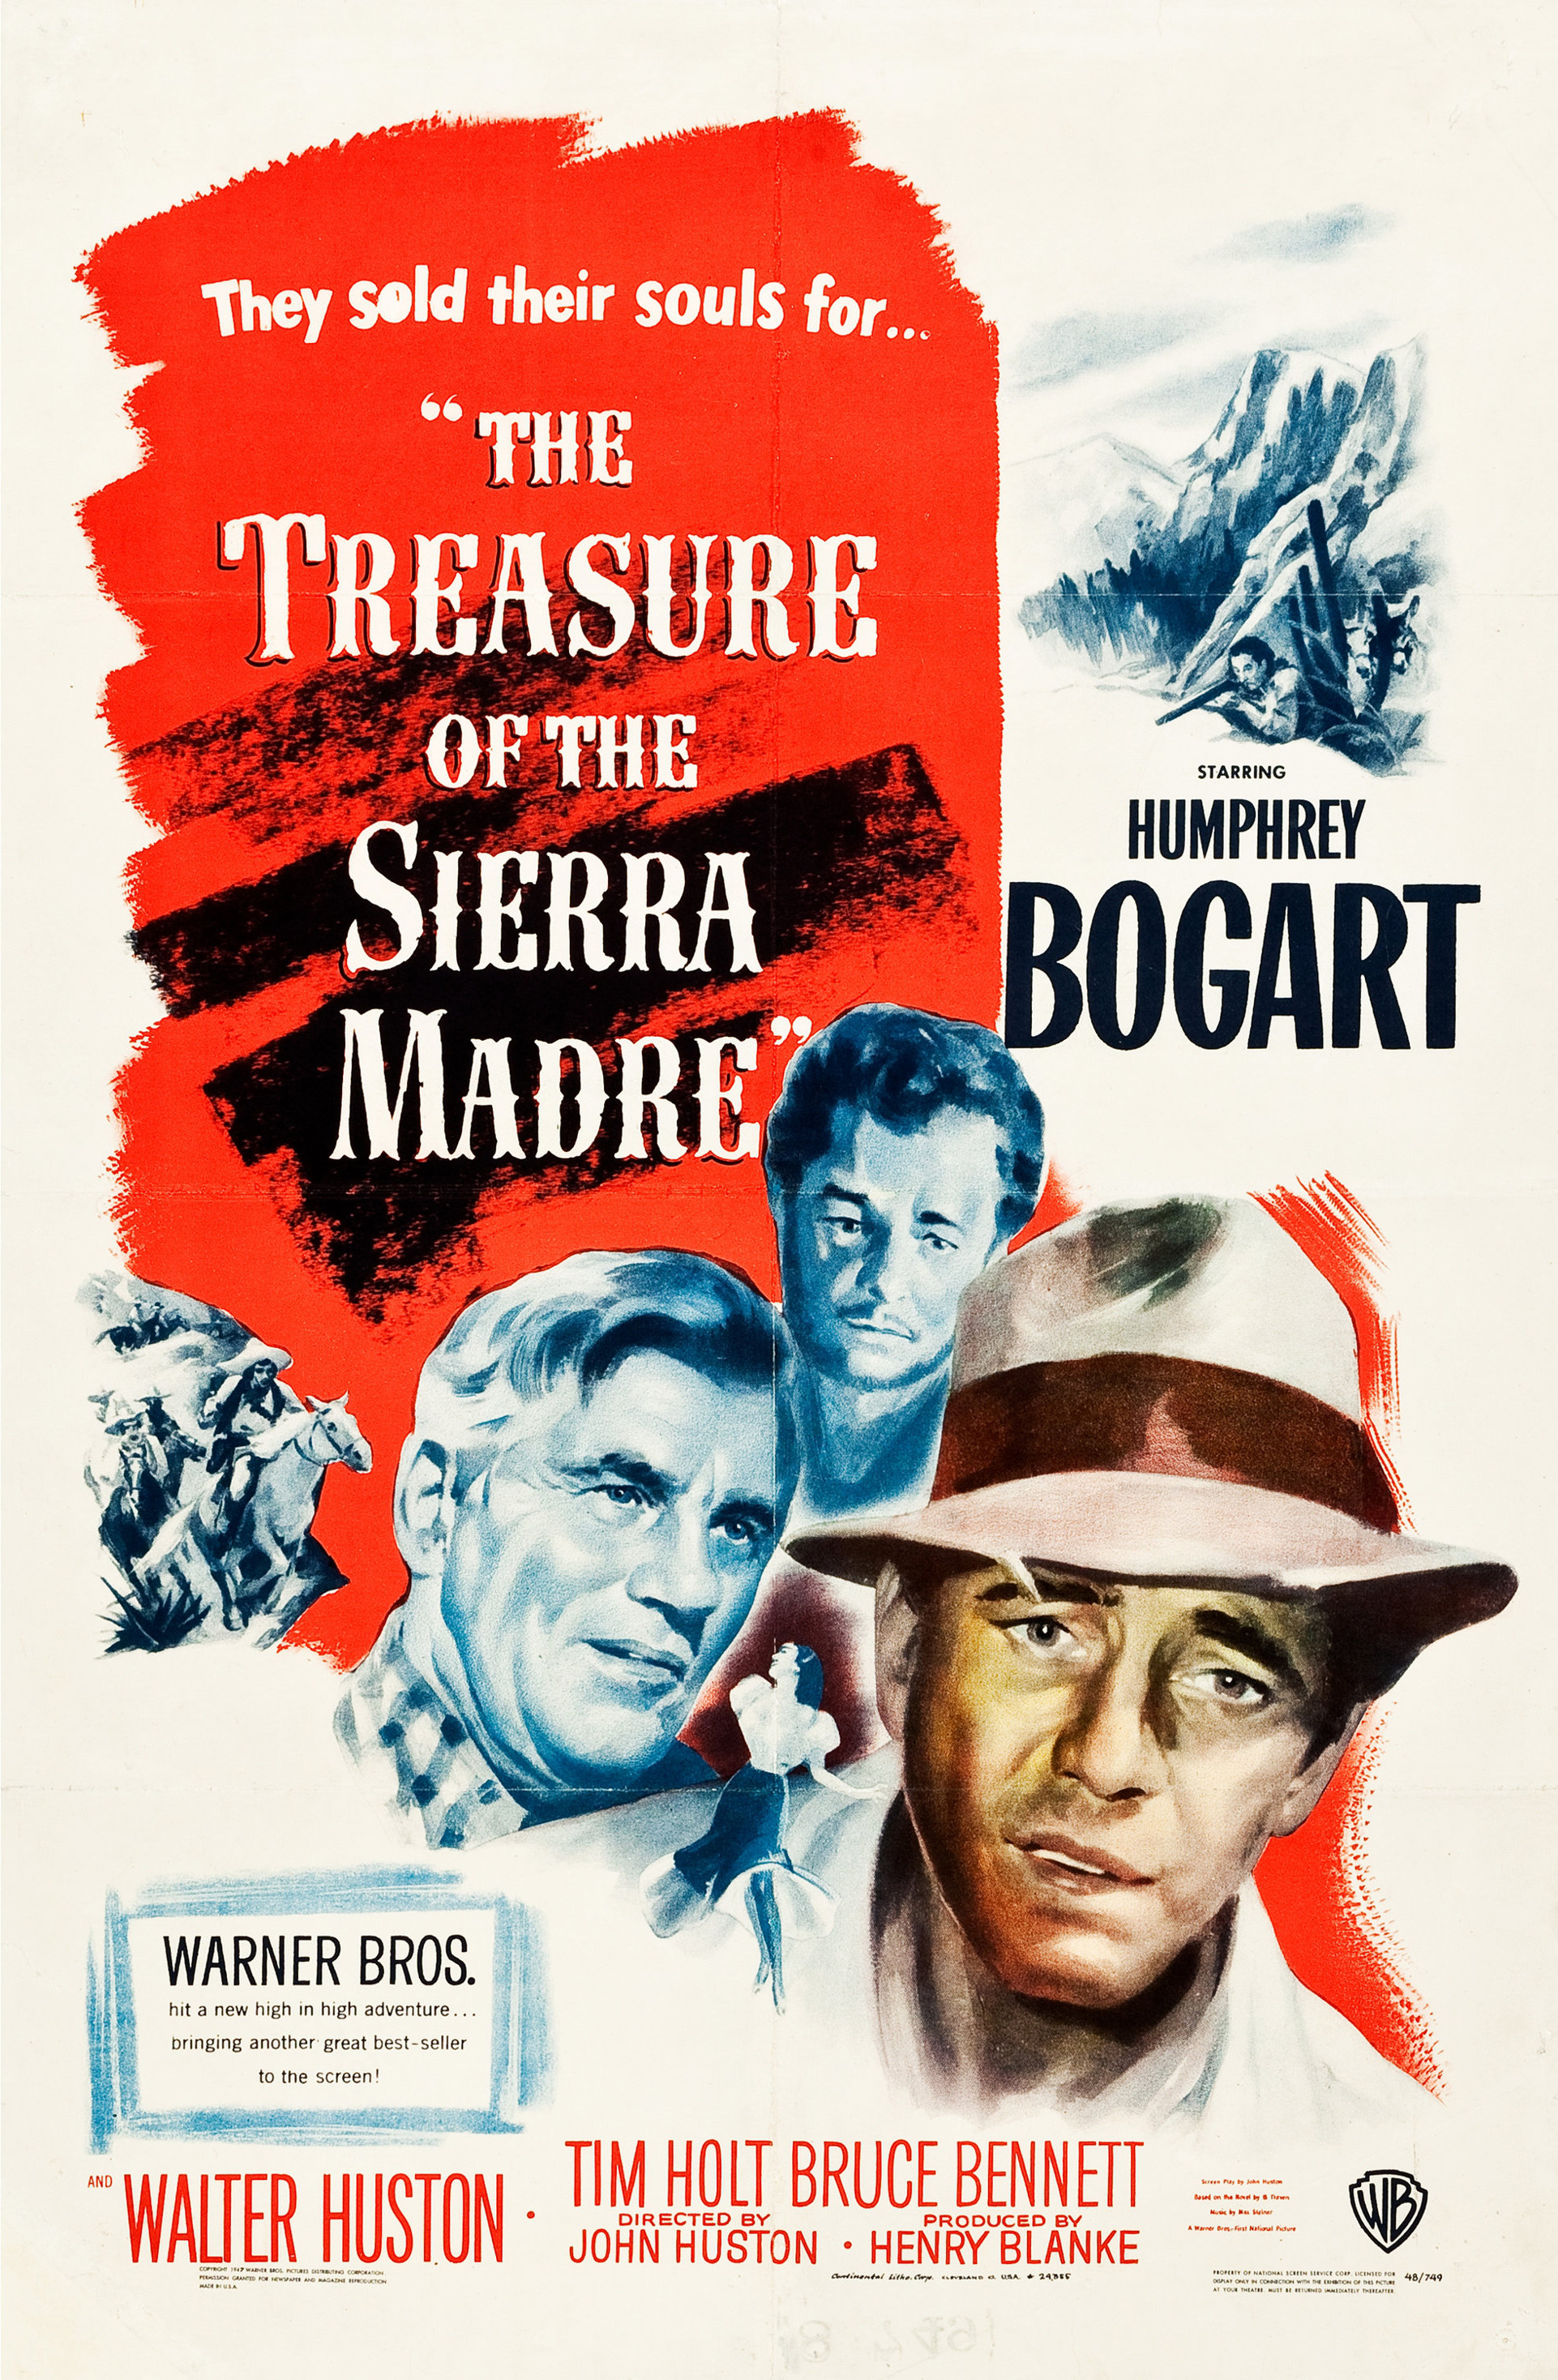 The Treasure of the Sierra Madre  Warner Bros. Entertainment Wiki